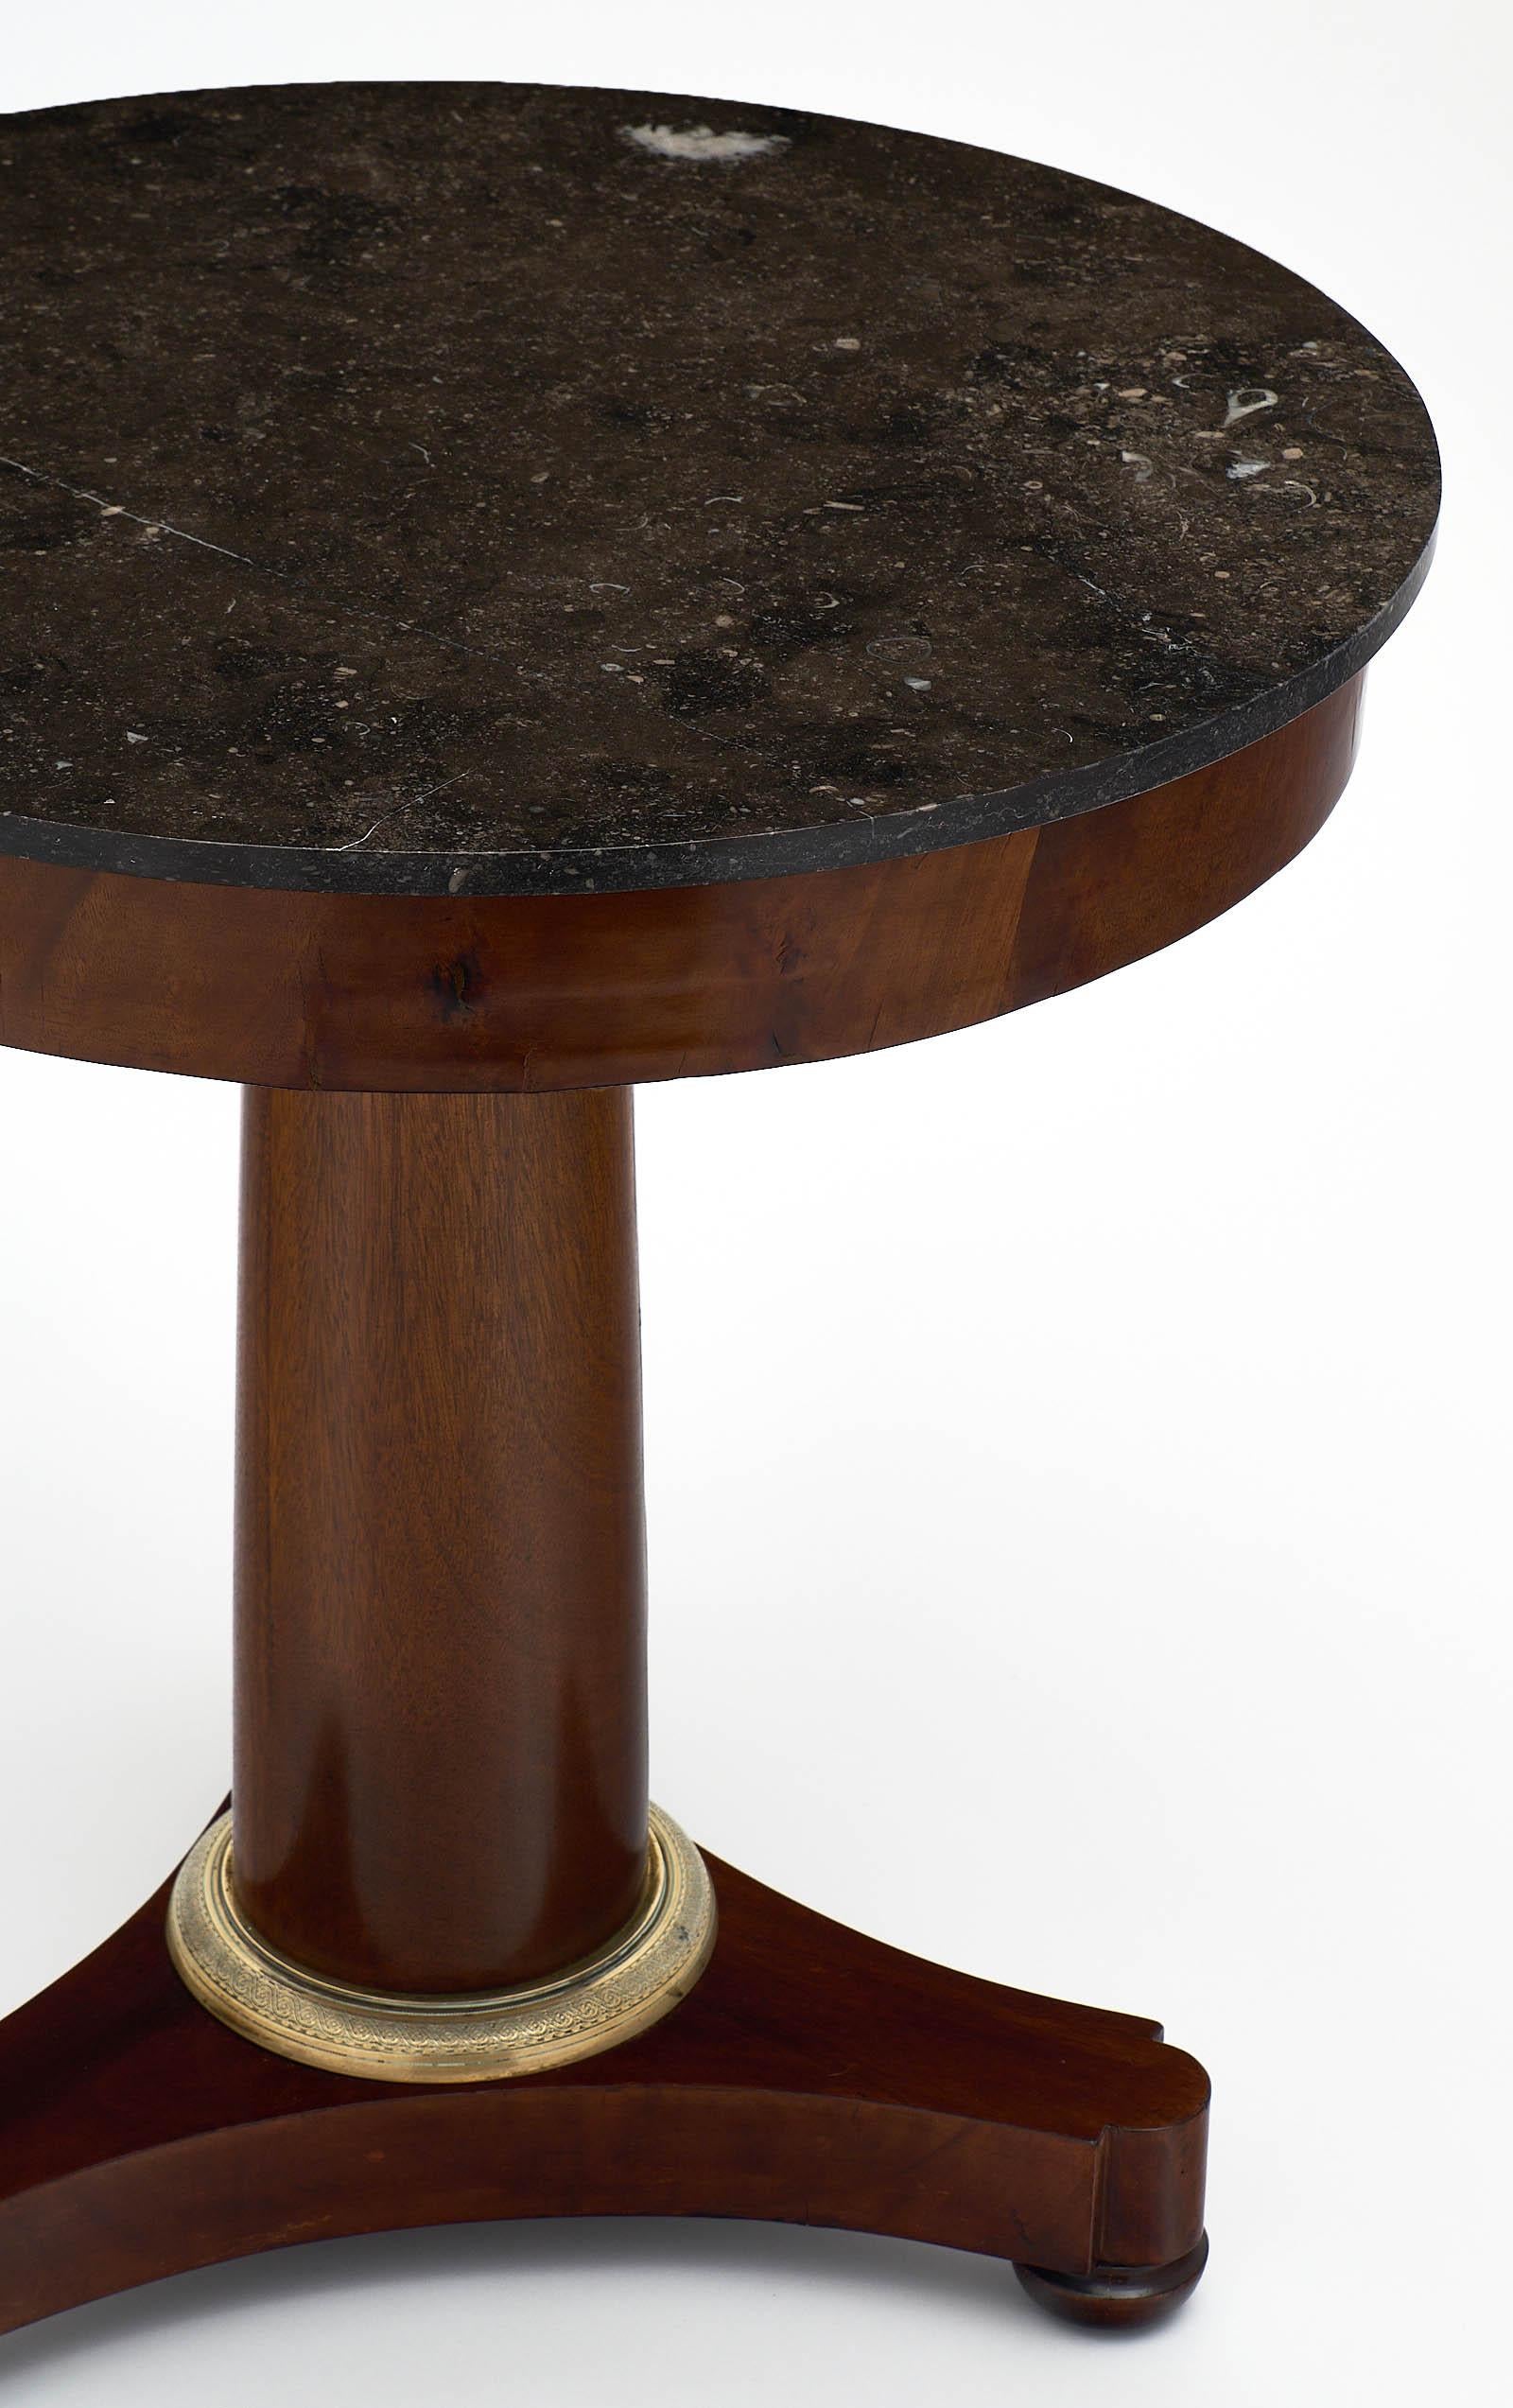 Empire period marble topped gueridon with a Cuban flamed mahogany base, finished with a lustrous French polish. The tripod feet have a finely cast bronze ring for decoration. The original marble top is intact.